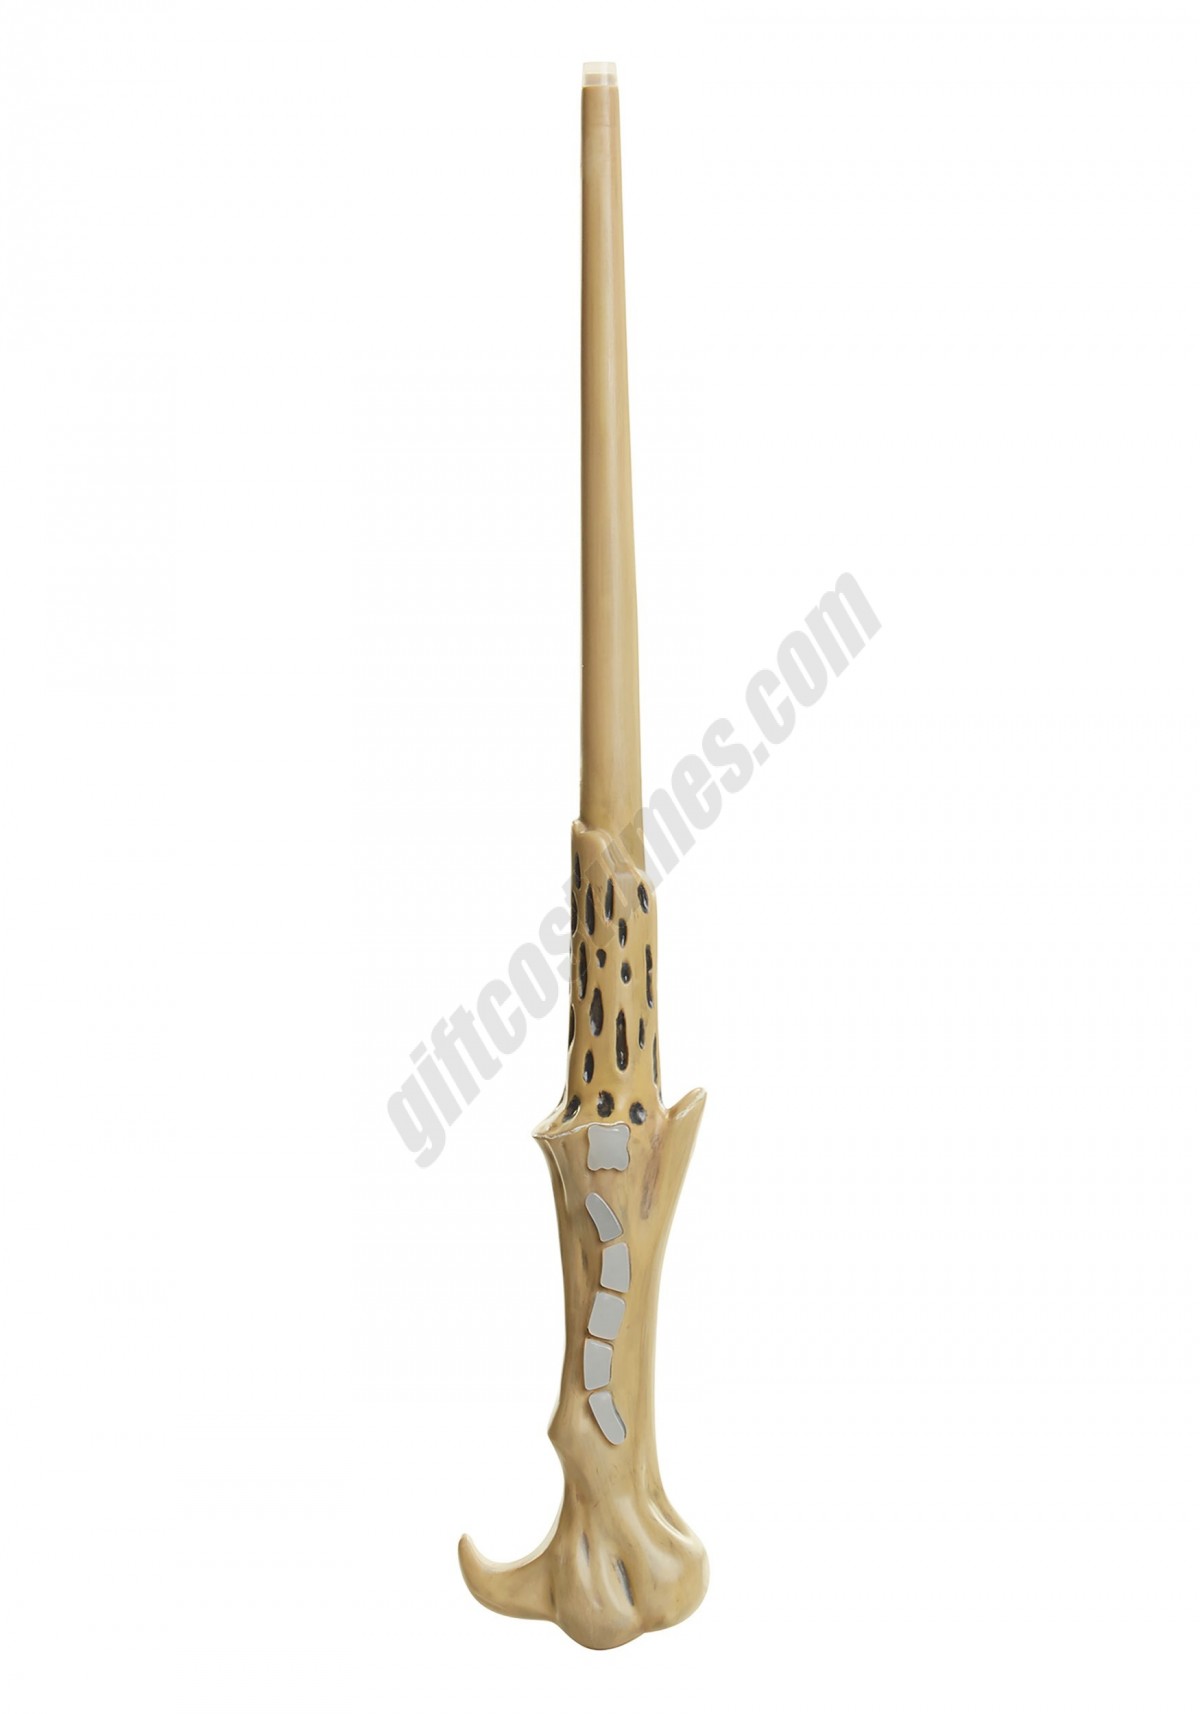 Voldemort Wand- Feature Wizard Wand Promotions - -0